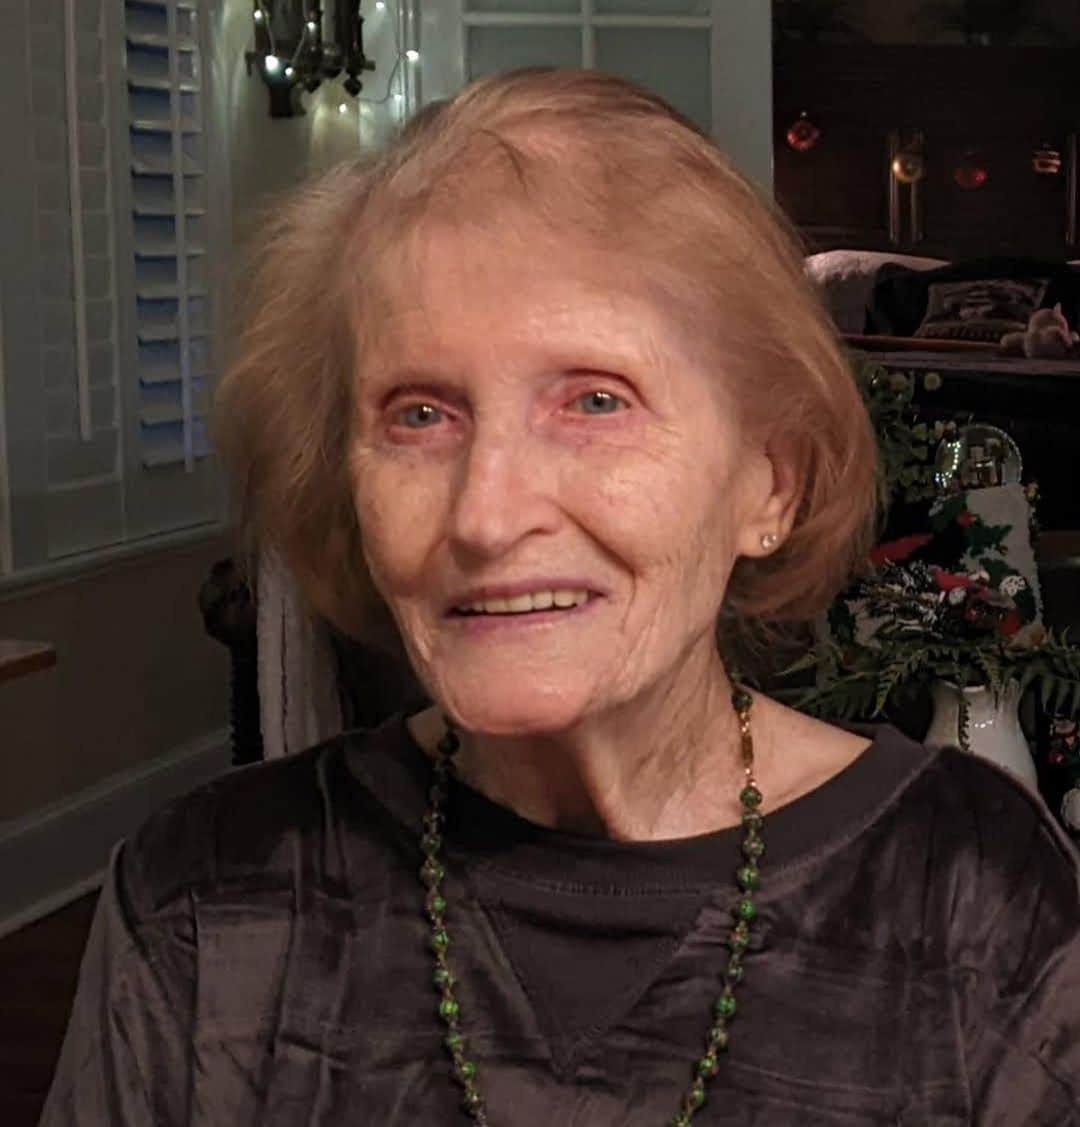 Snorri Sturlusonのインスタグラム：「🗣️💌📮Calling all cards!Alright fam, Ma loves cards and mail. She is 97, can’t remember anything anymore, and look how lovely she looked at thanksgiving dinner! Some of you send her wonderful cards every year and she talks about it endlessly. Let’s brighten this old lady’s life (“everyone I’ve ever loved is dead now”) and stuff her mailbox with joy. DM for address (same as last year and every year!) ❤️🐈✨」